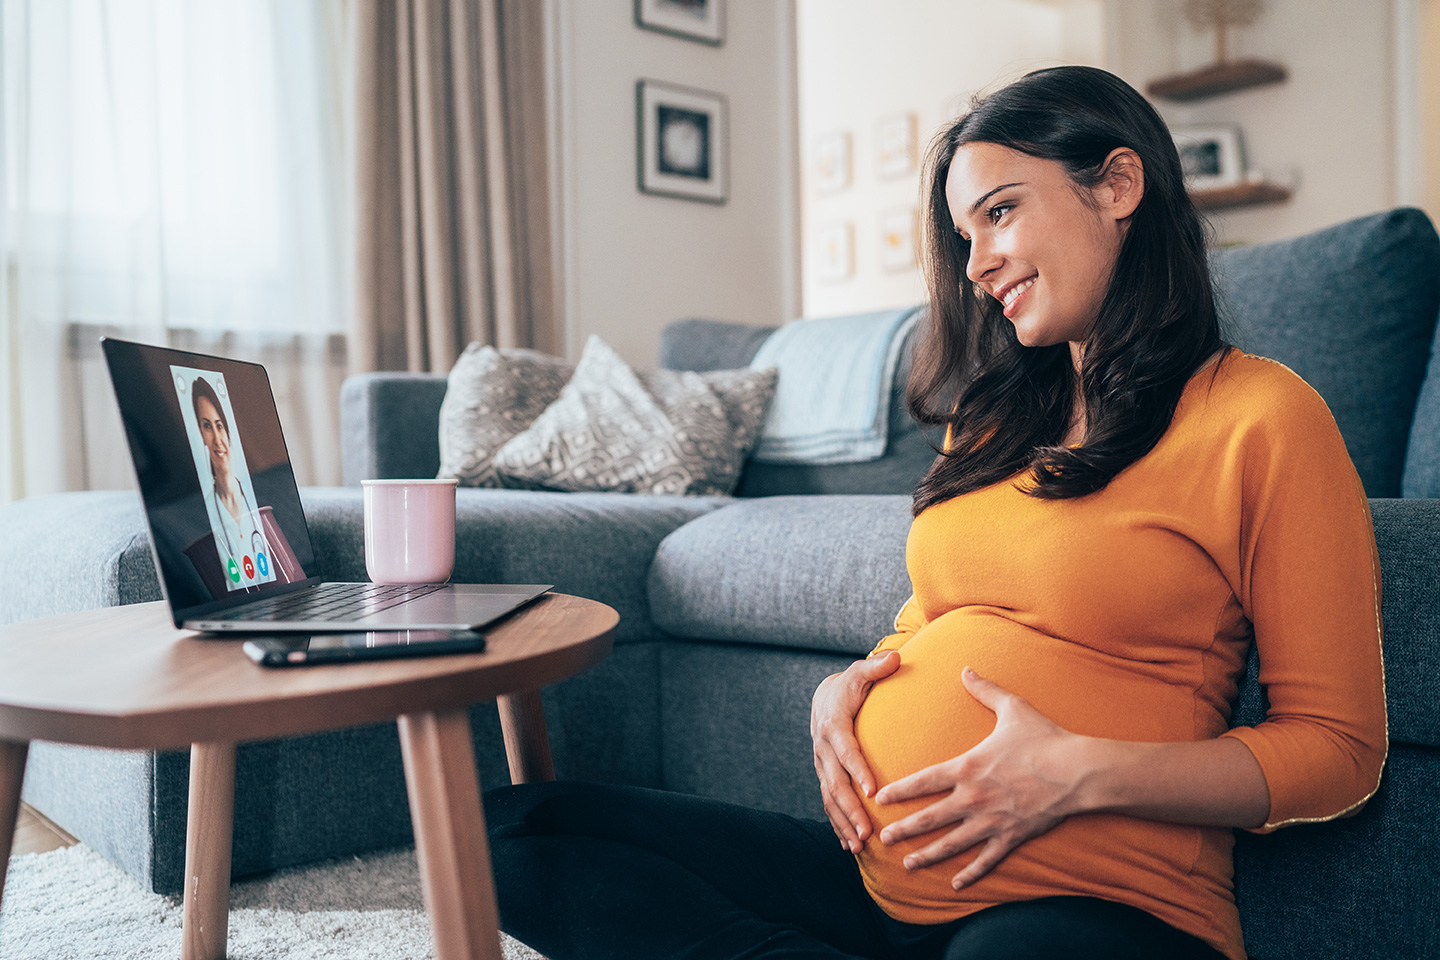 Pregnant woman receiving genetic counseling via a telehealth appointment